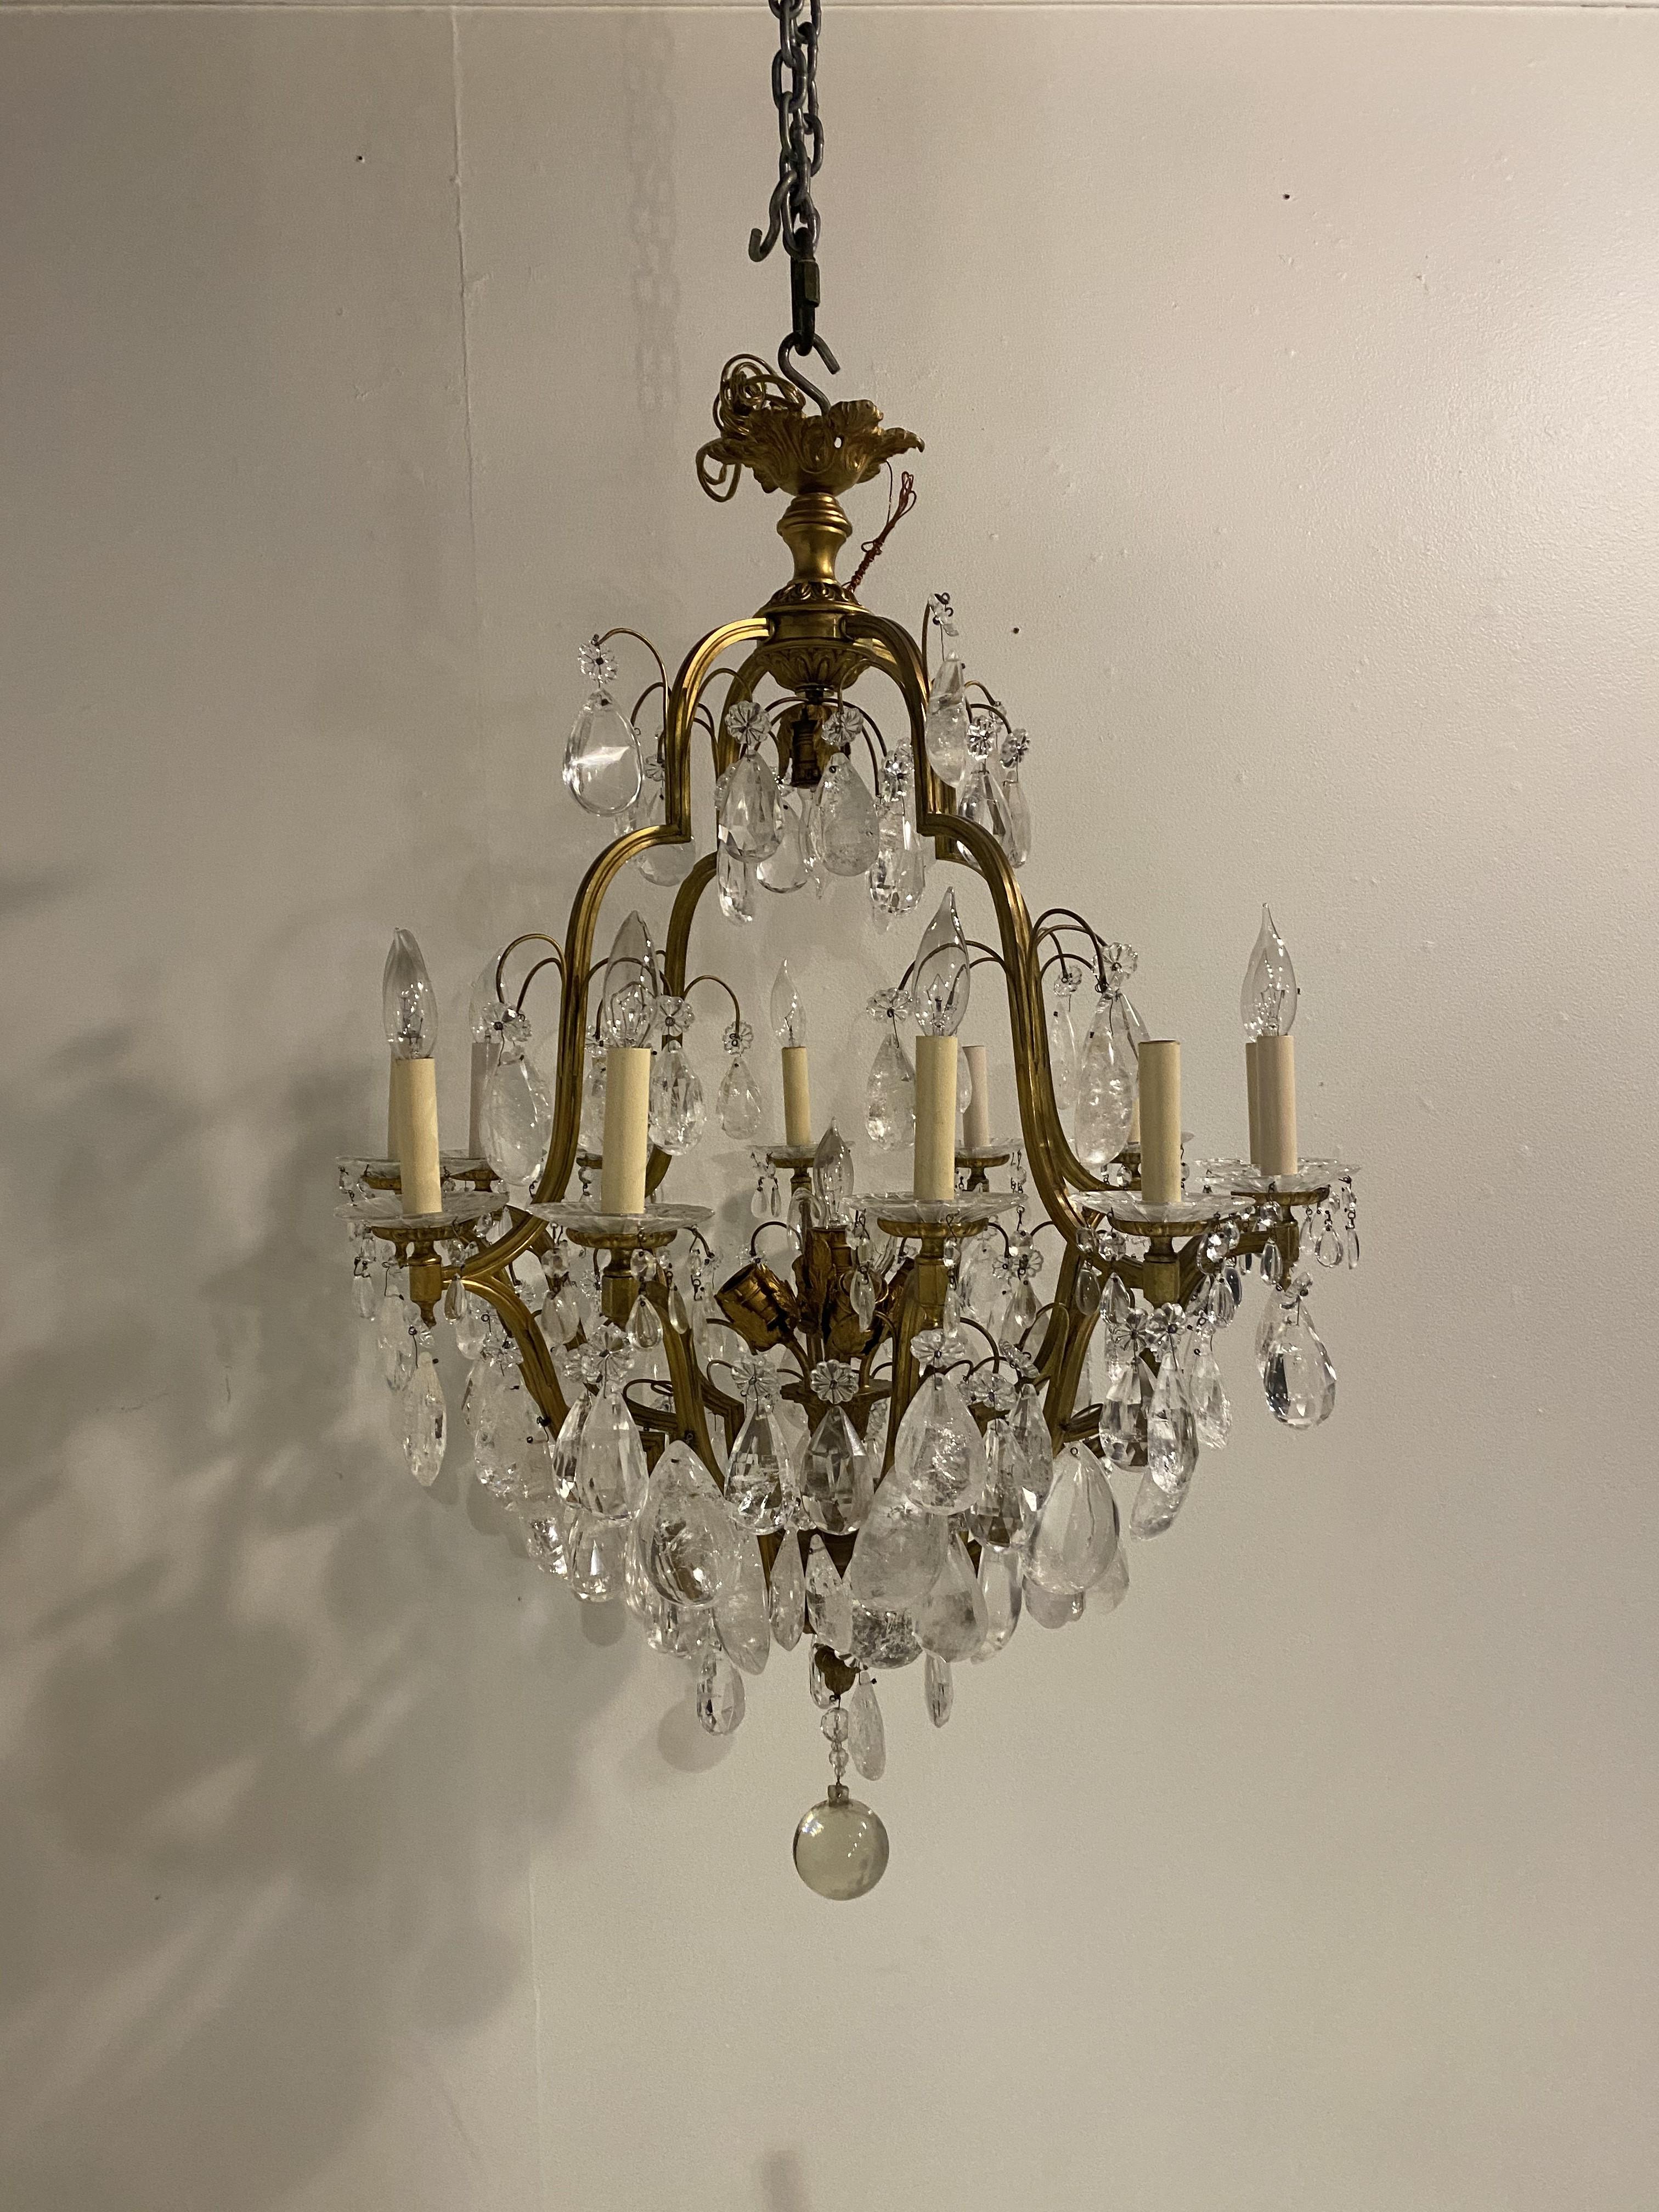 A circa 1900's French gilt bronze chandelier with rock crystal hangings (12 arms and 6 interior lights.).